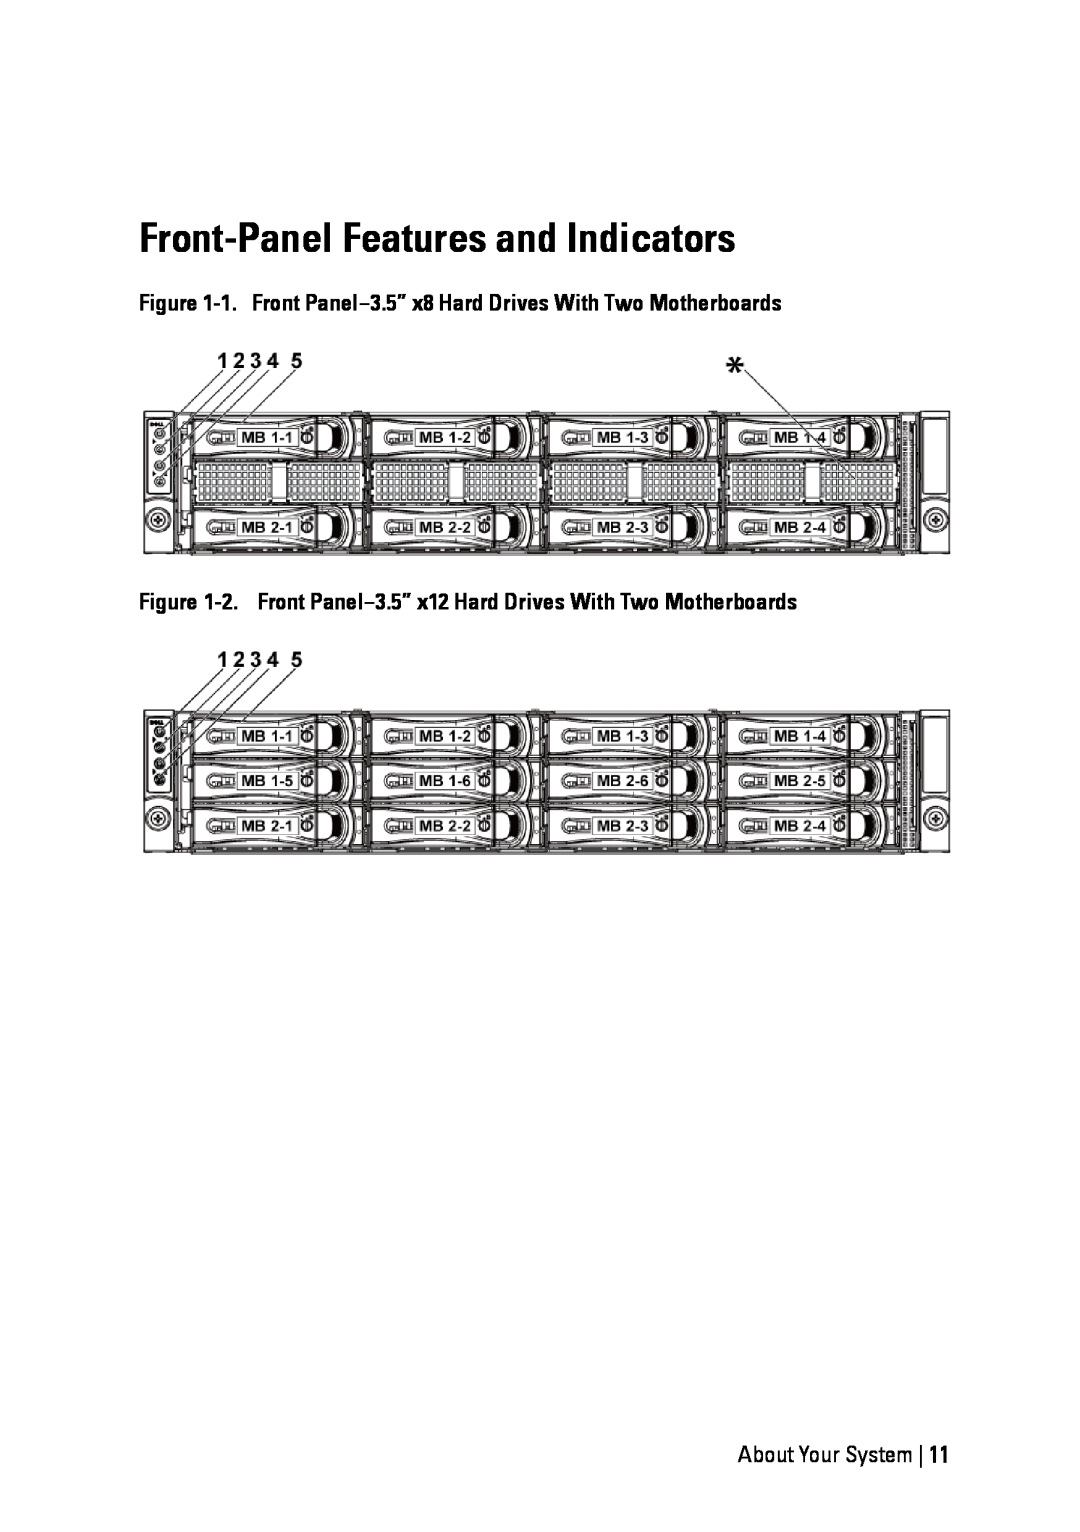 Dell C6145 manual Front-Panel Features and Indicators, 1. Front Panel−3.5” x8 Hard Drives With Two Motherboards 